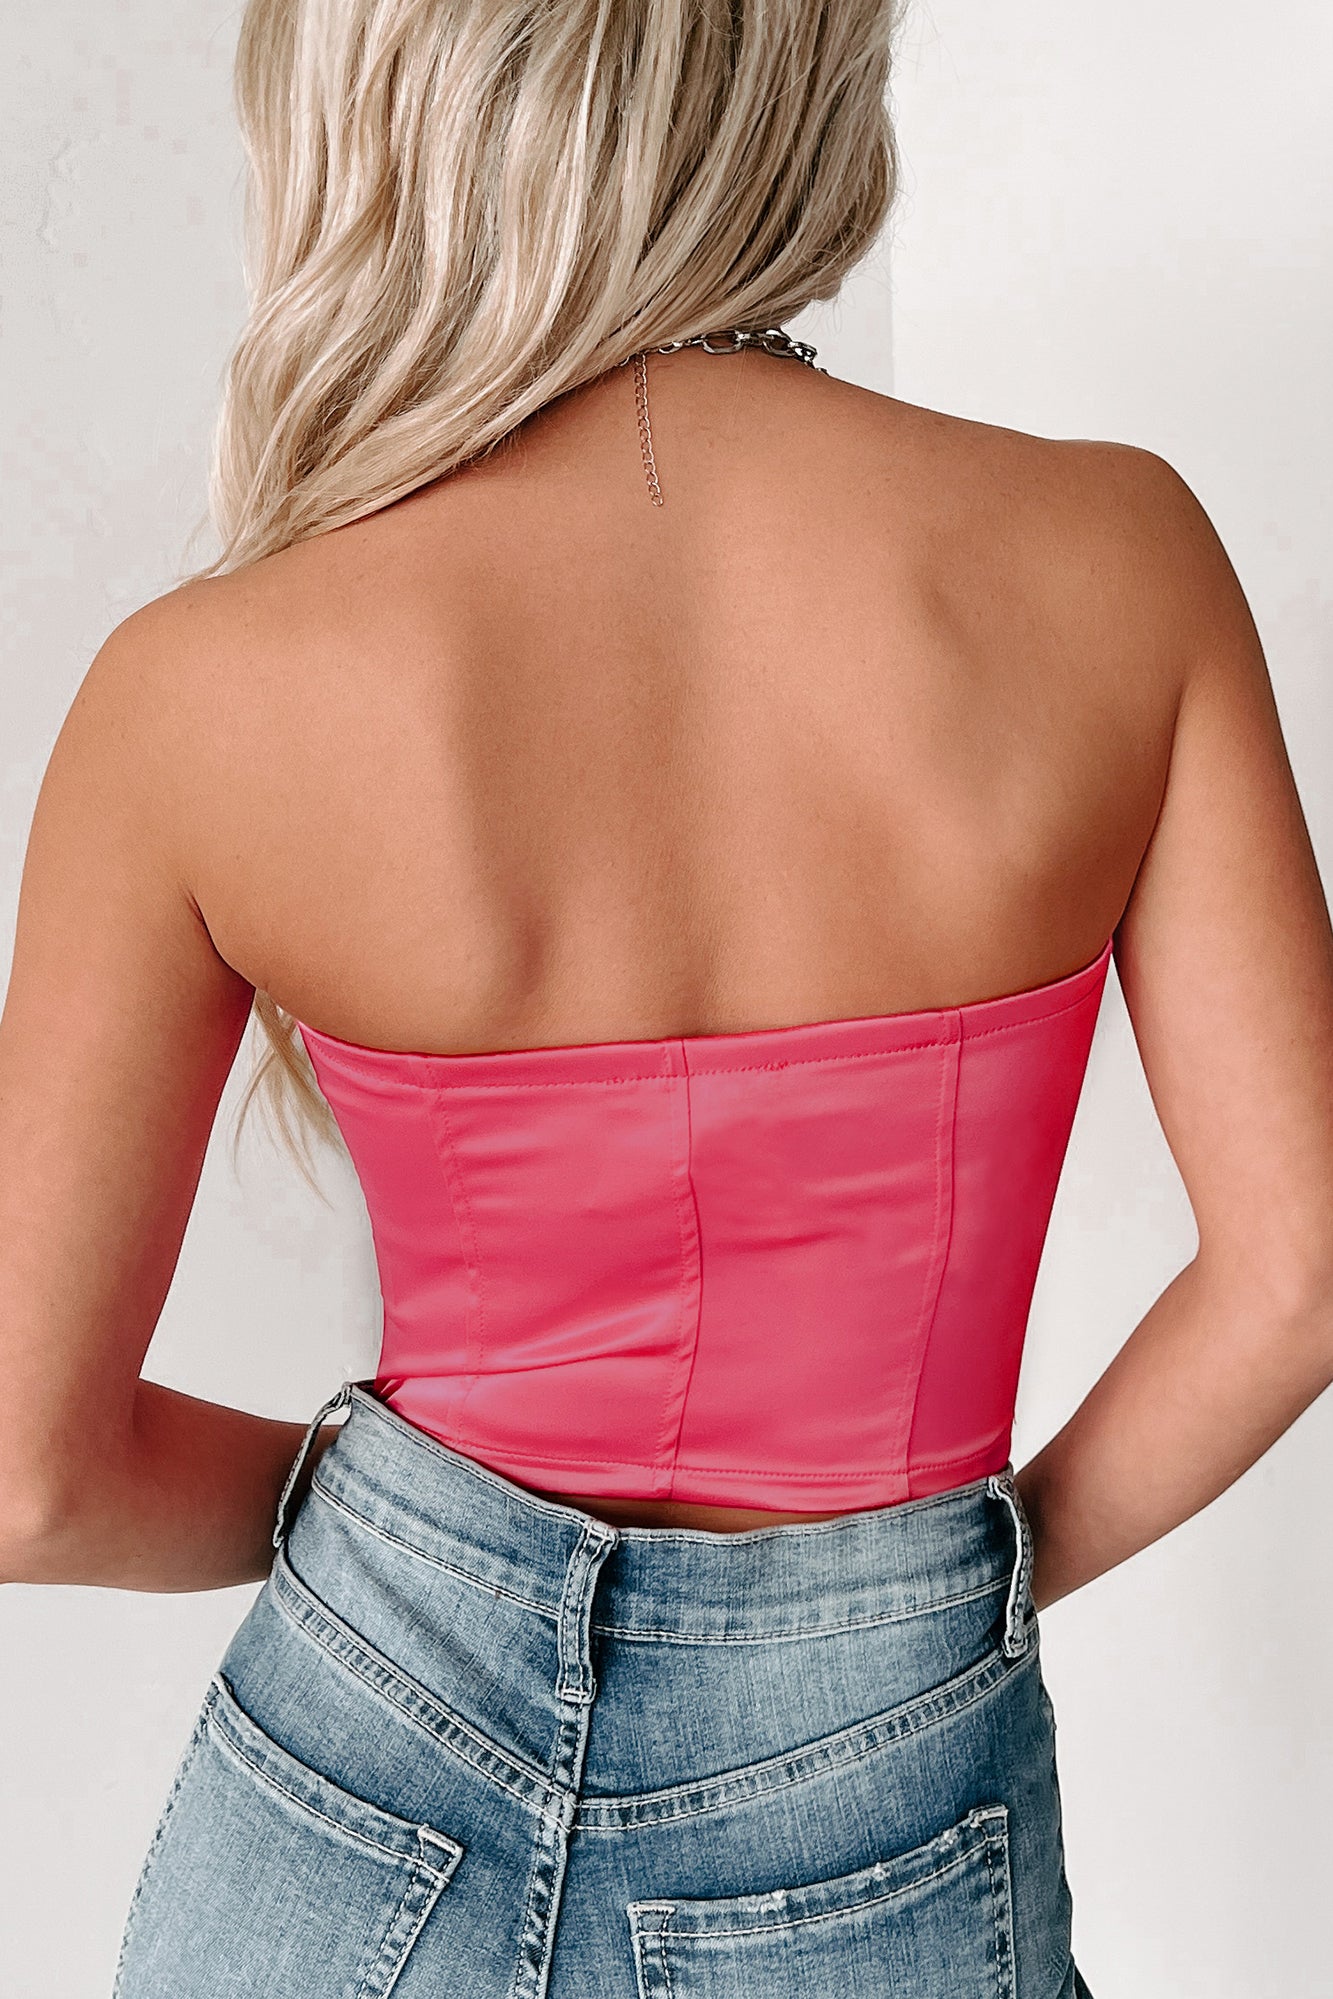 Wicked Games Satin Corset Top (Hot Pink)